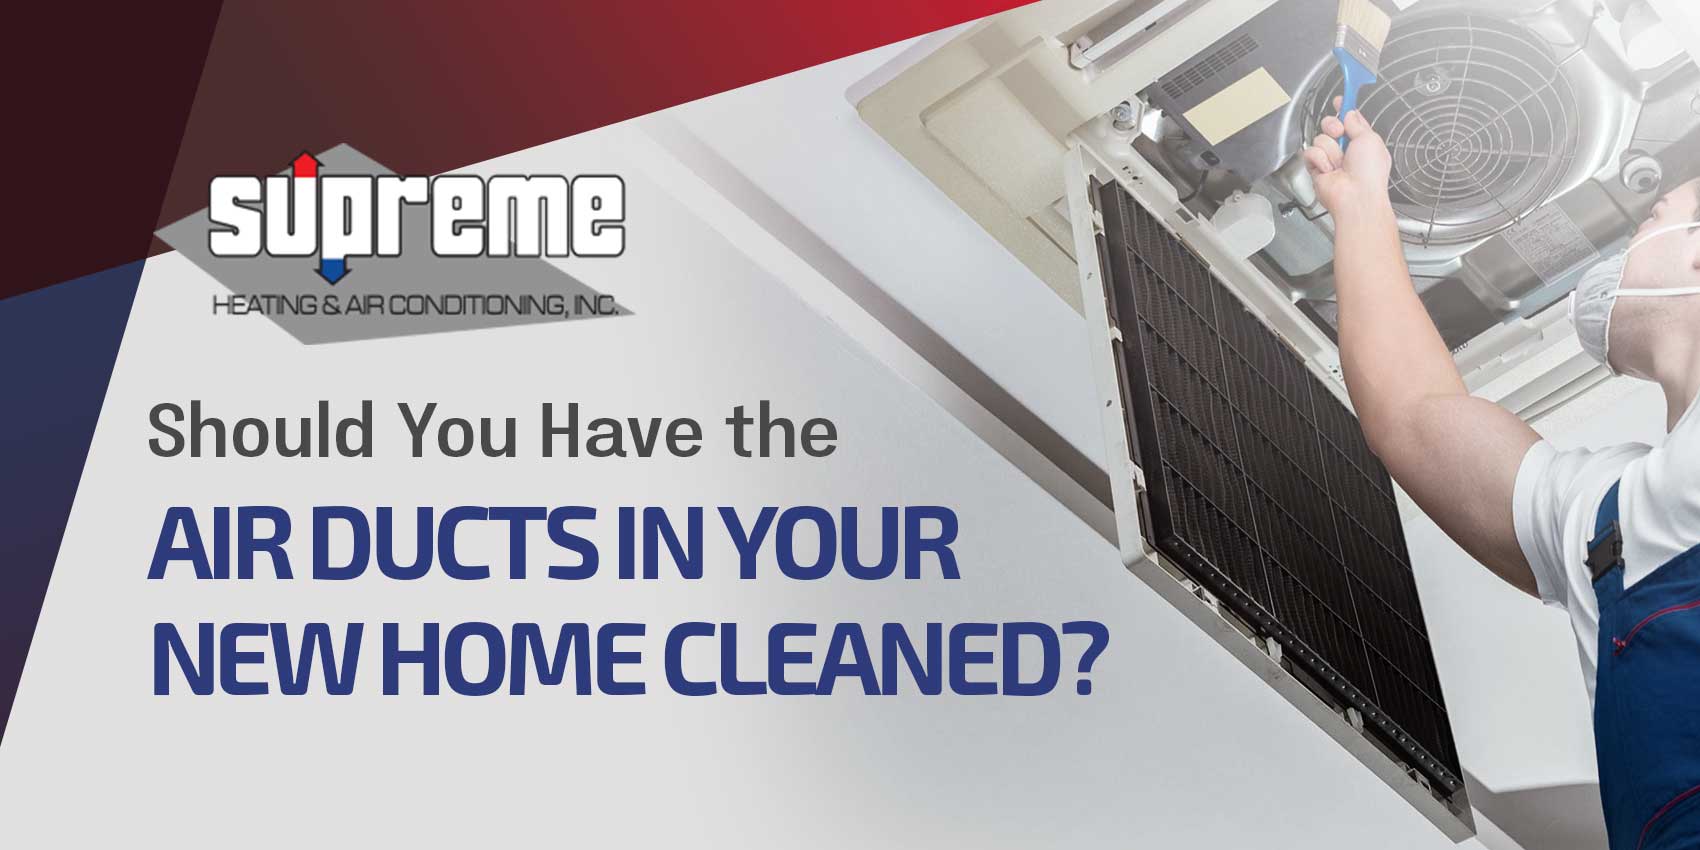 Should You Have the Air Ducts in Your New Home Cleaned?